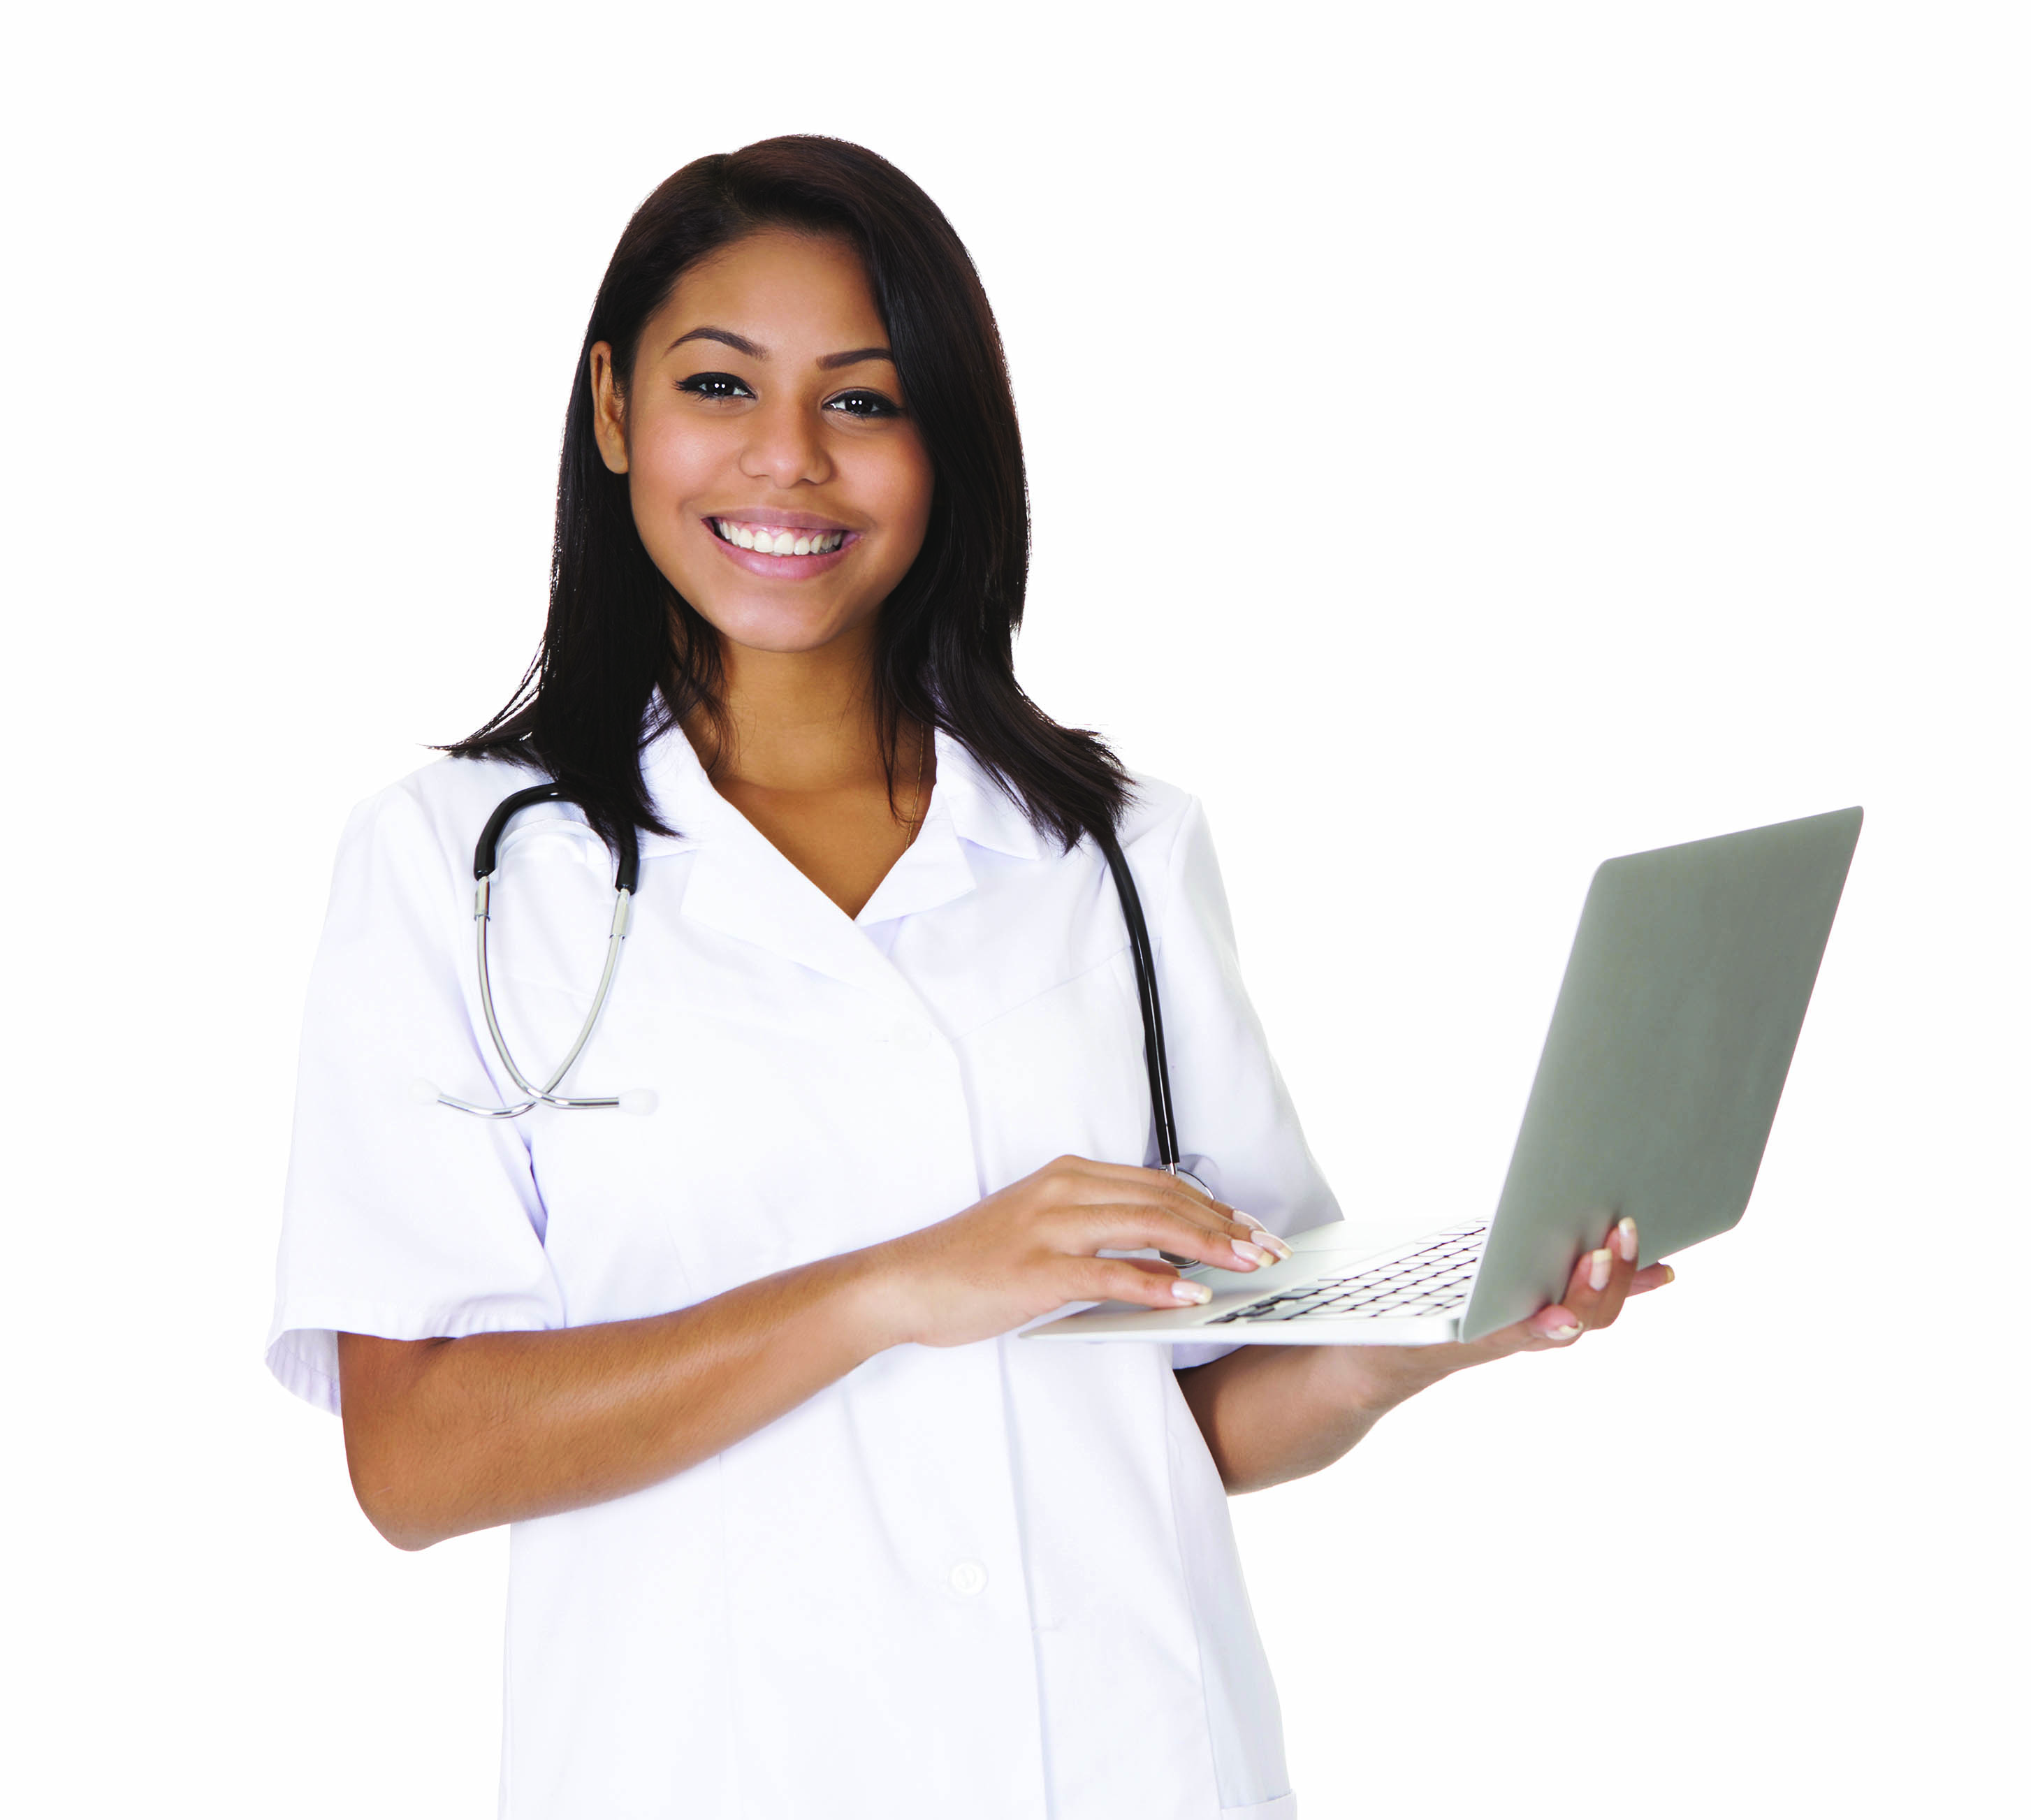 How to Choose a Nursing School: From Traditional to Online and Accelerated Programs